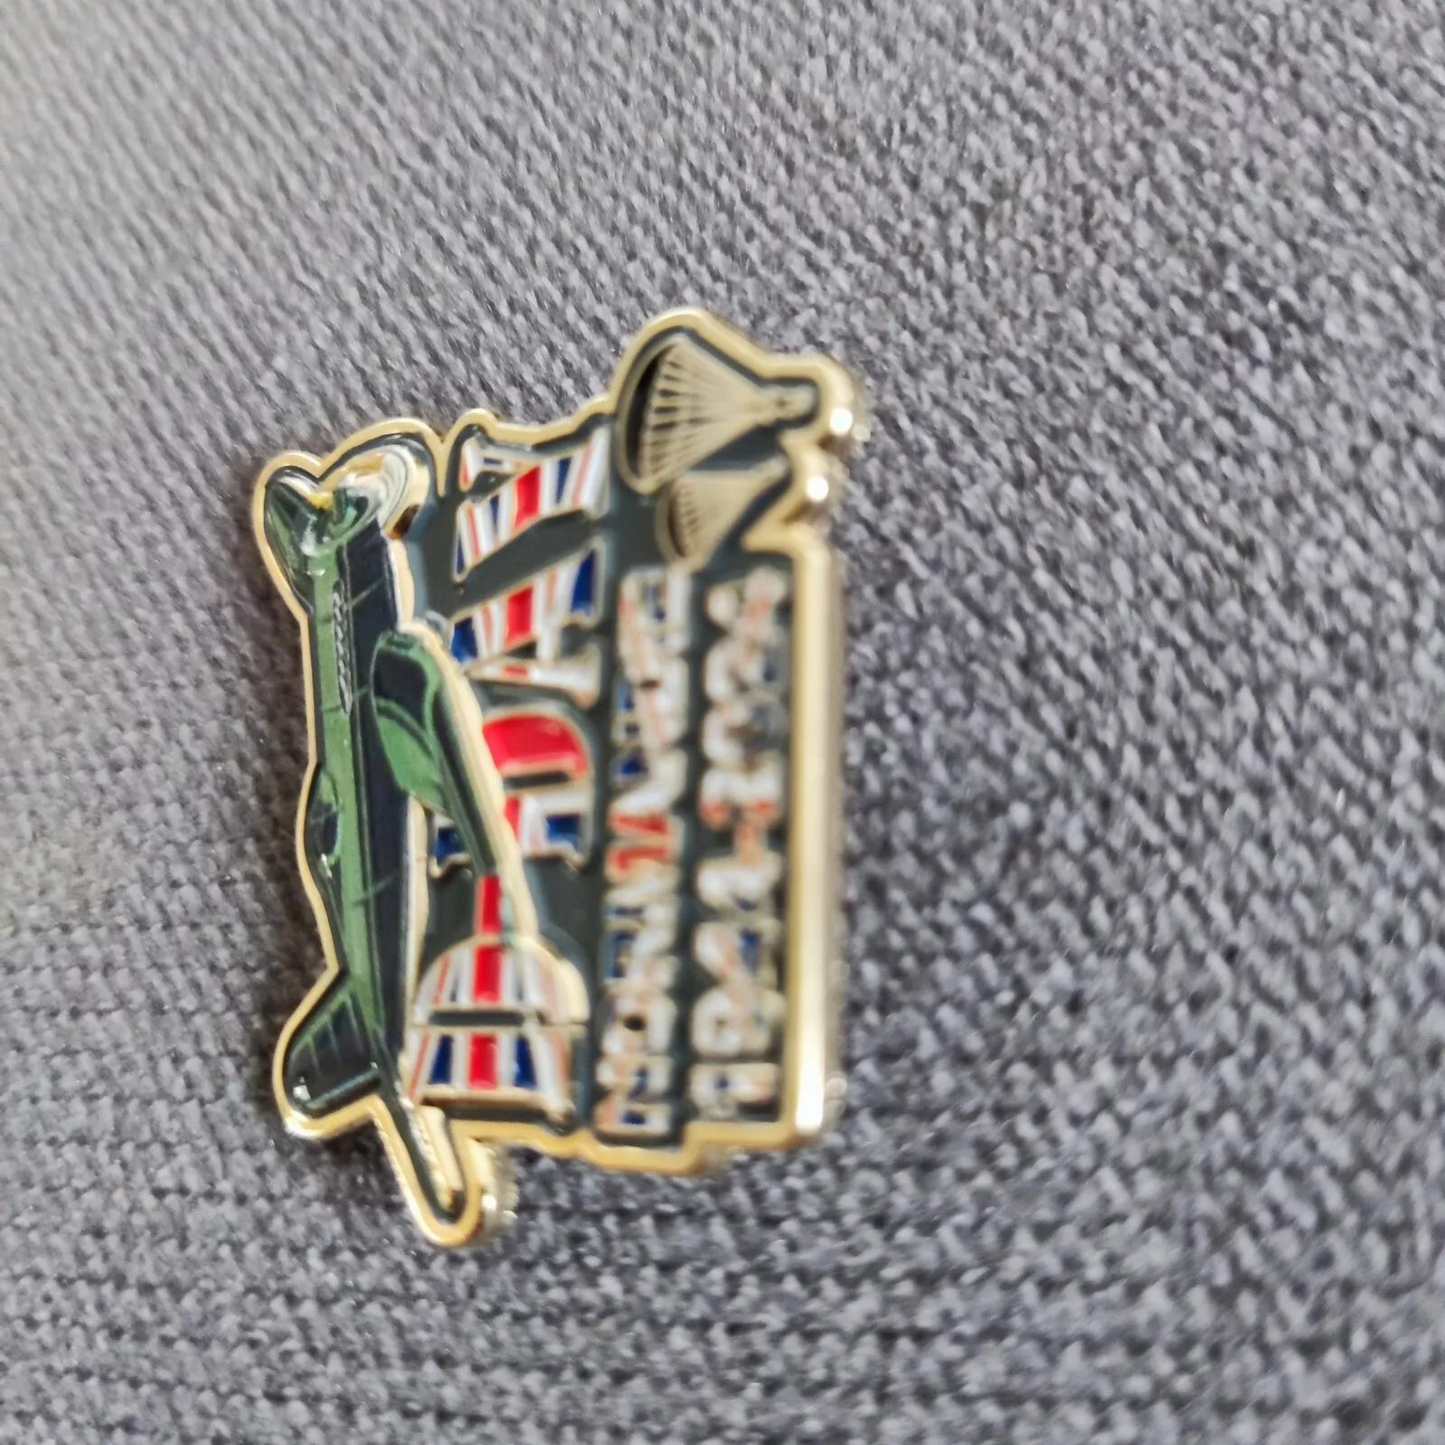 Normandy D-DAY 80th Anniversary Pin Badge